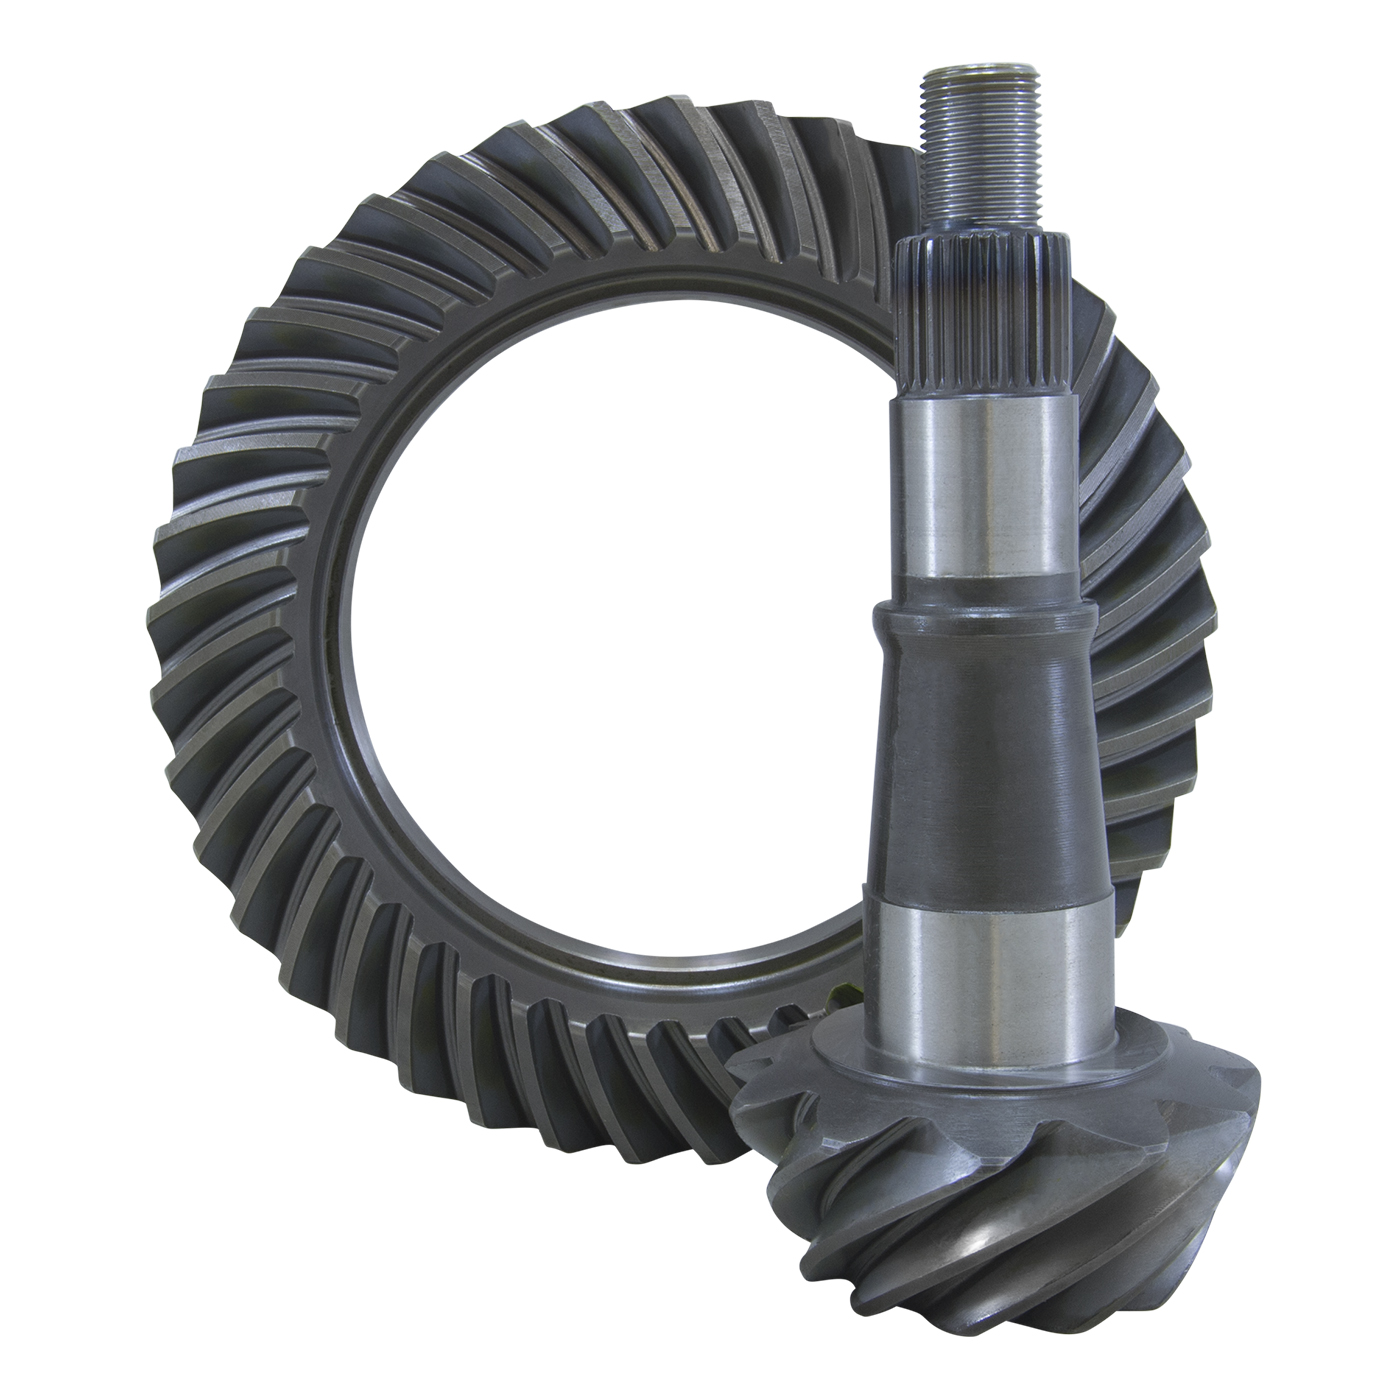 USA Standard Ring & Pinion gear set for Chrysler 9.25" front in a 4.56 ratio